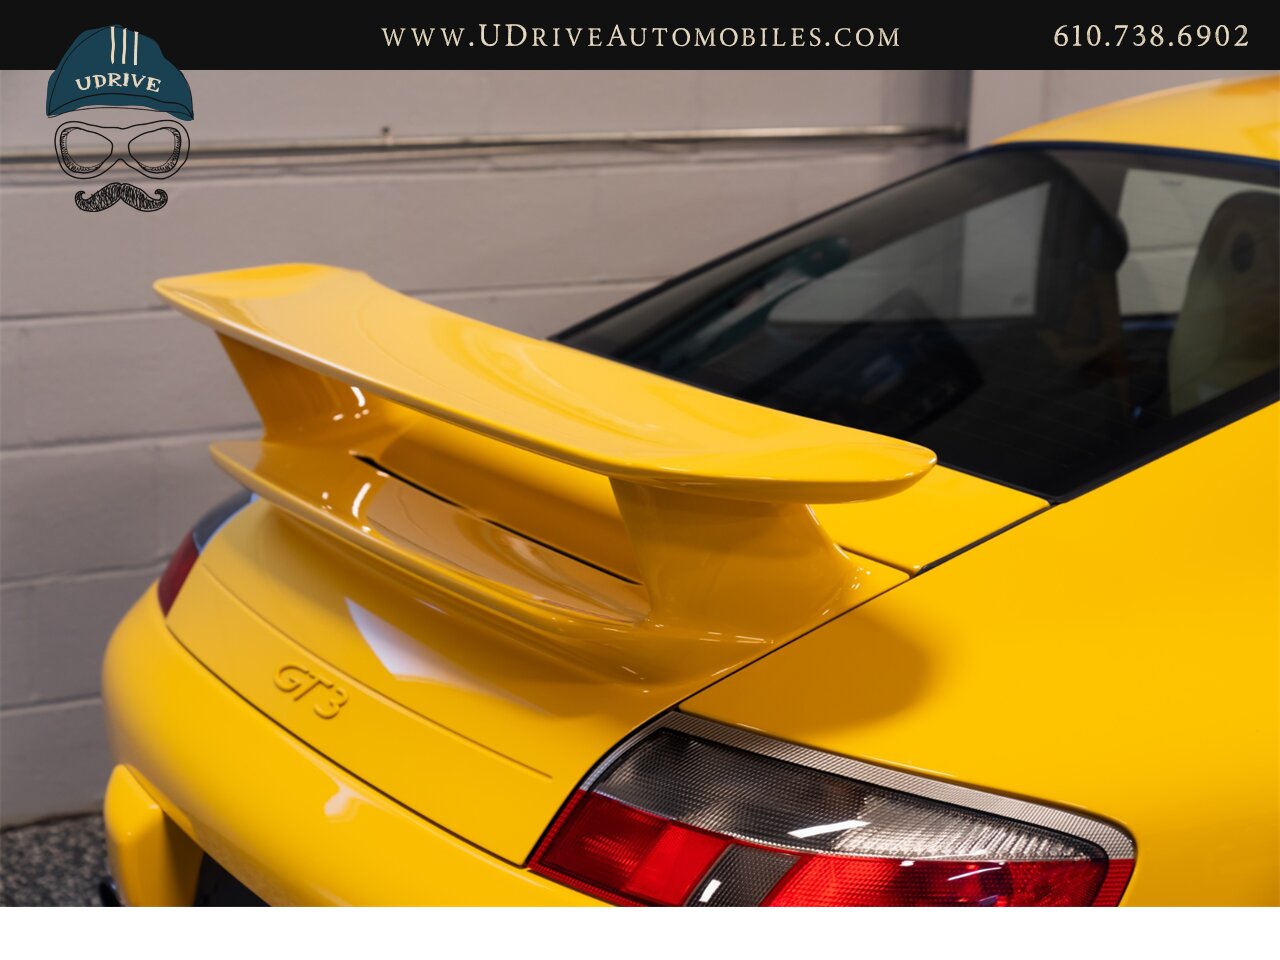 2005 Porsche 911 GT3 996 Speed Yellow Sport Seats Pntd Hardbacks  Pntd Console Deviating Stitch Yellow Accents Throughout - Photo 21 - West Chester, PA 19382